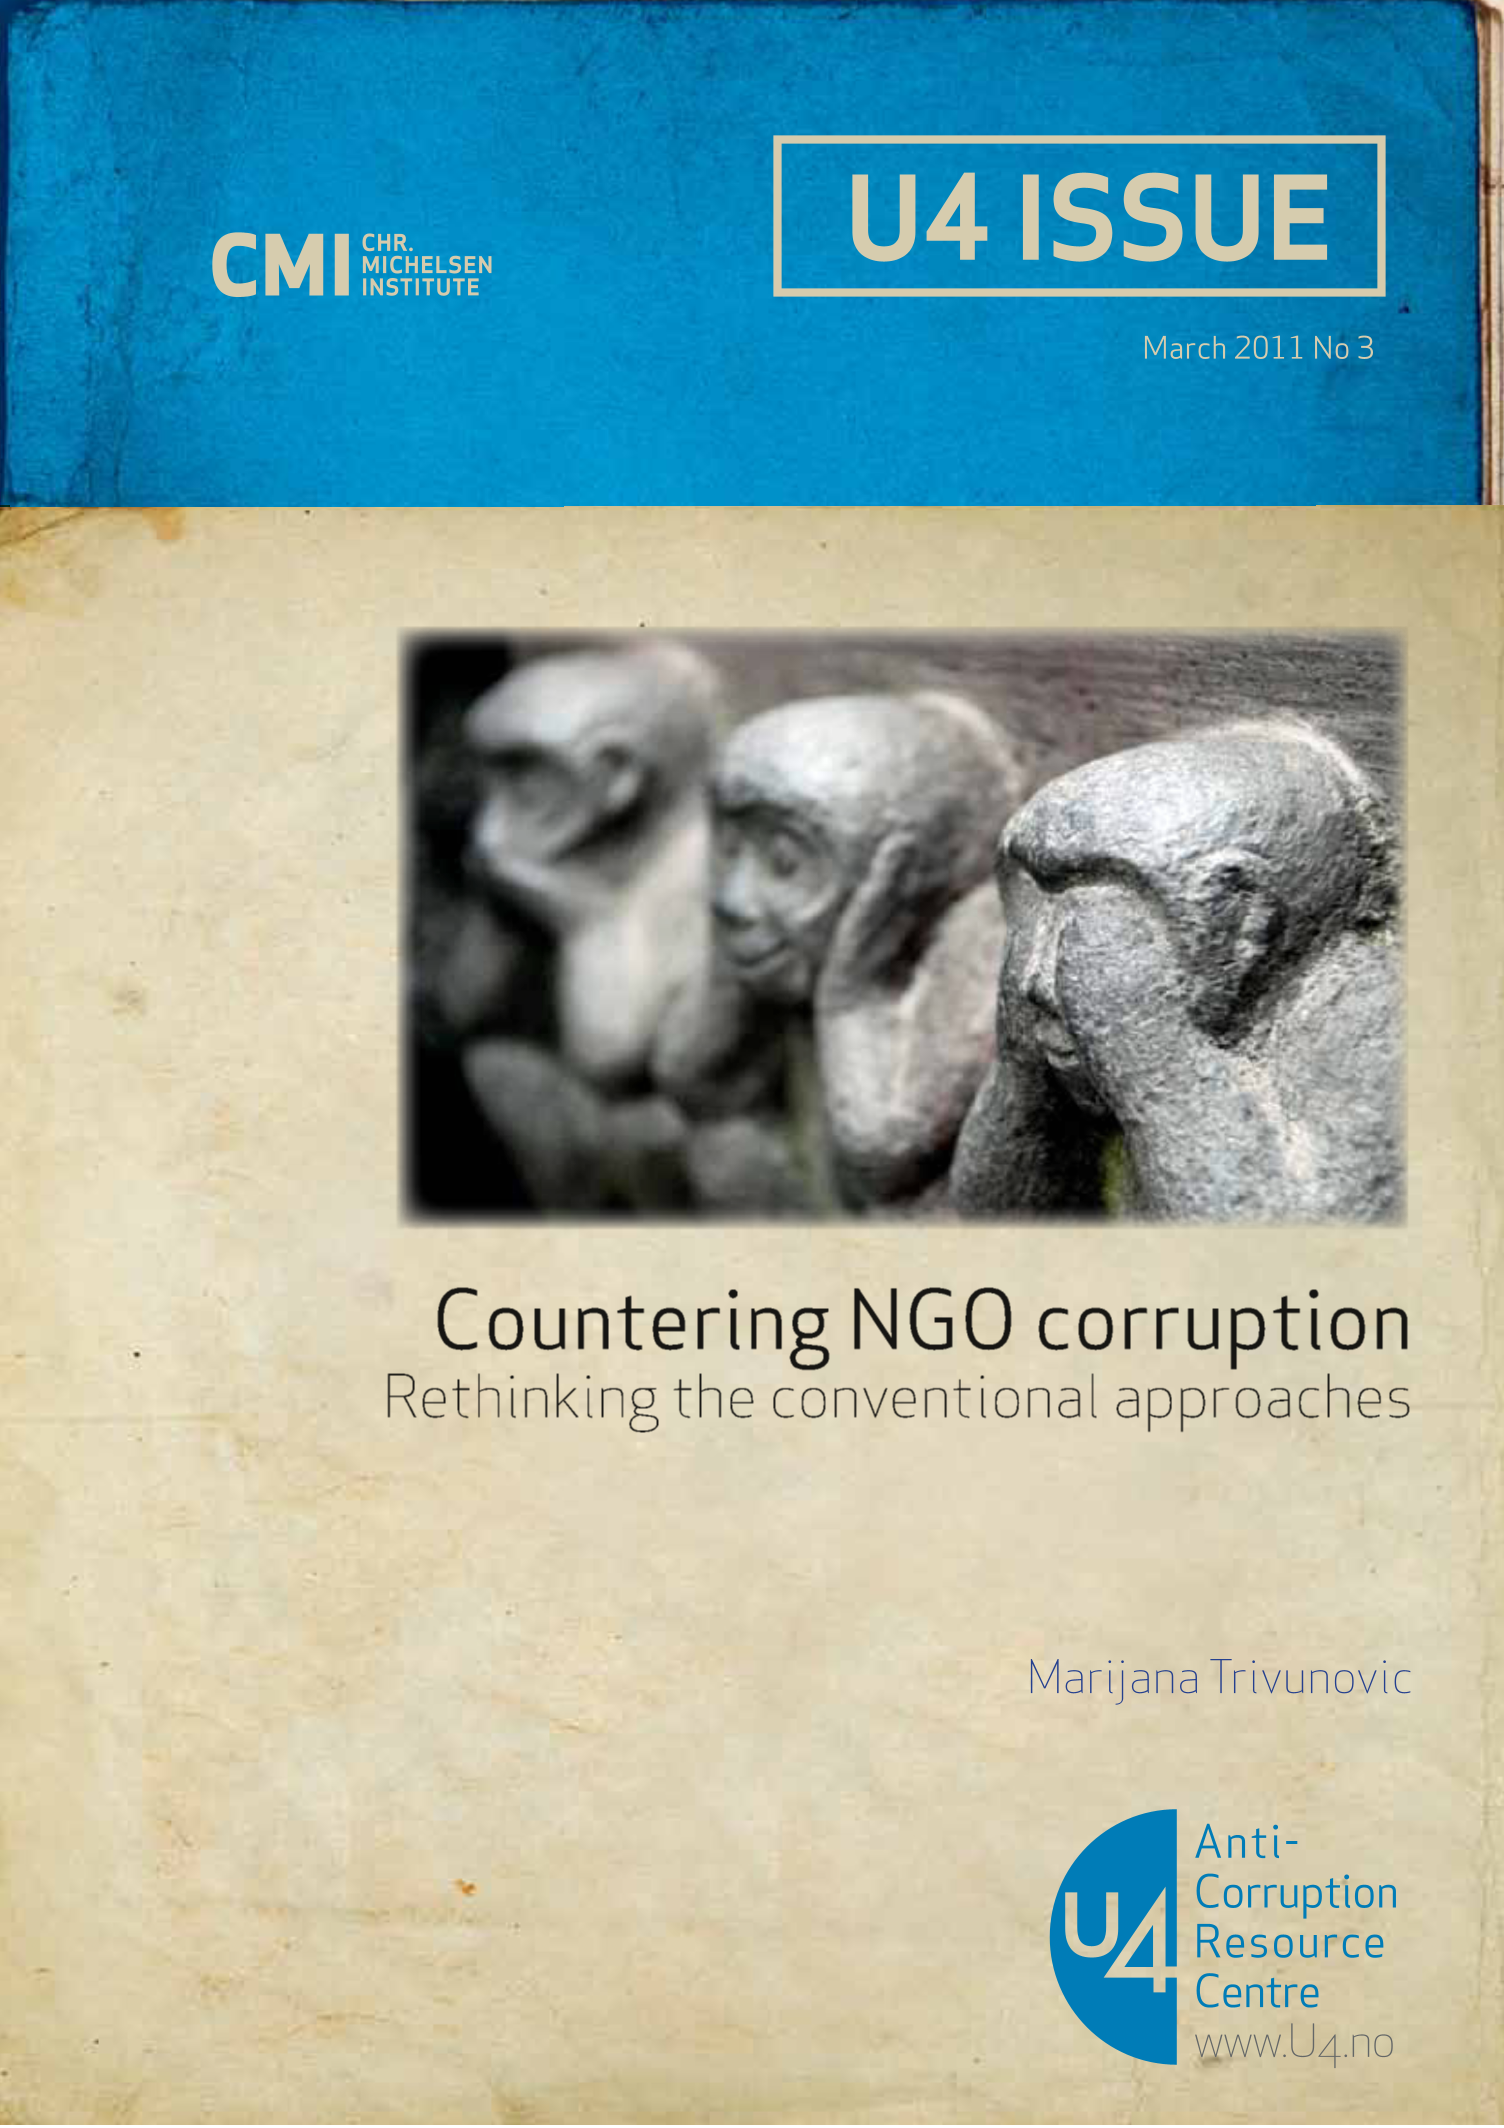 Countering NGO corruption: Rethinking the conventional approaches